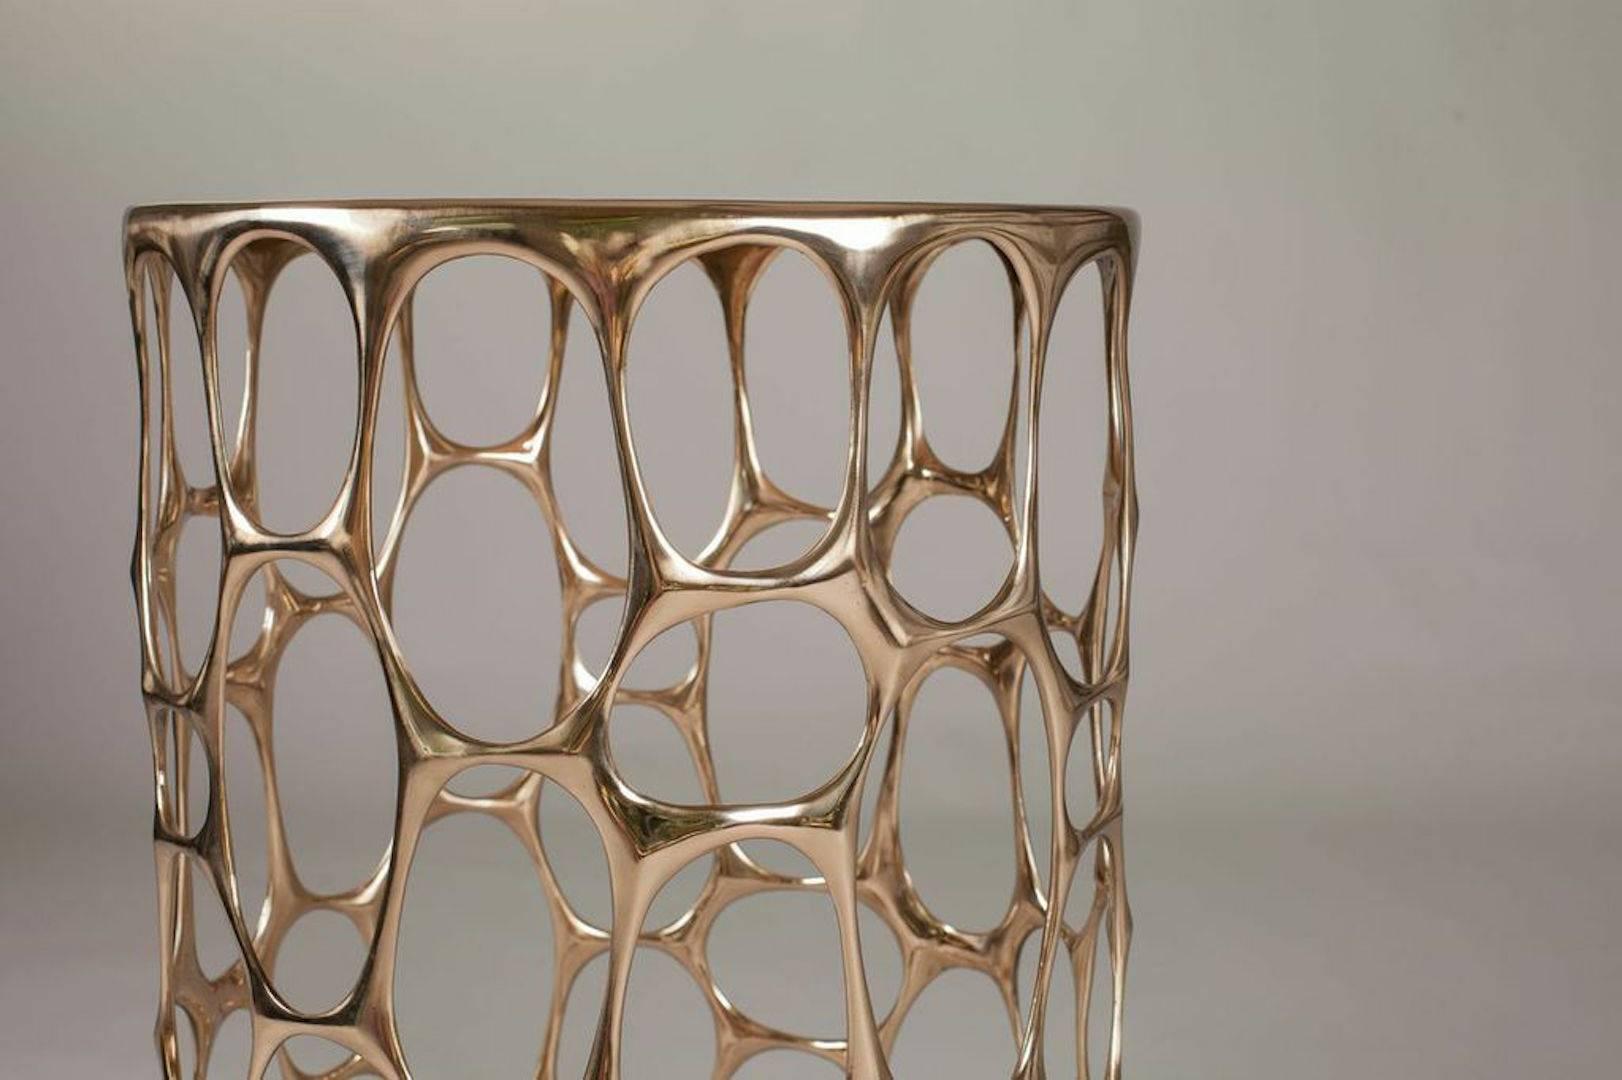 The Homage to Gaudi side table is hand-sculpted and cast in bronze using the time-honored method of lost-wax casting. After casting, each abstract table is painstaking sanded by hand to create a polished bronze finish. Nick Alan King is one of few